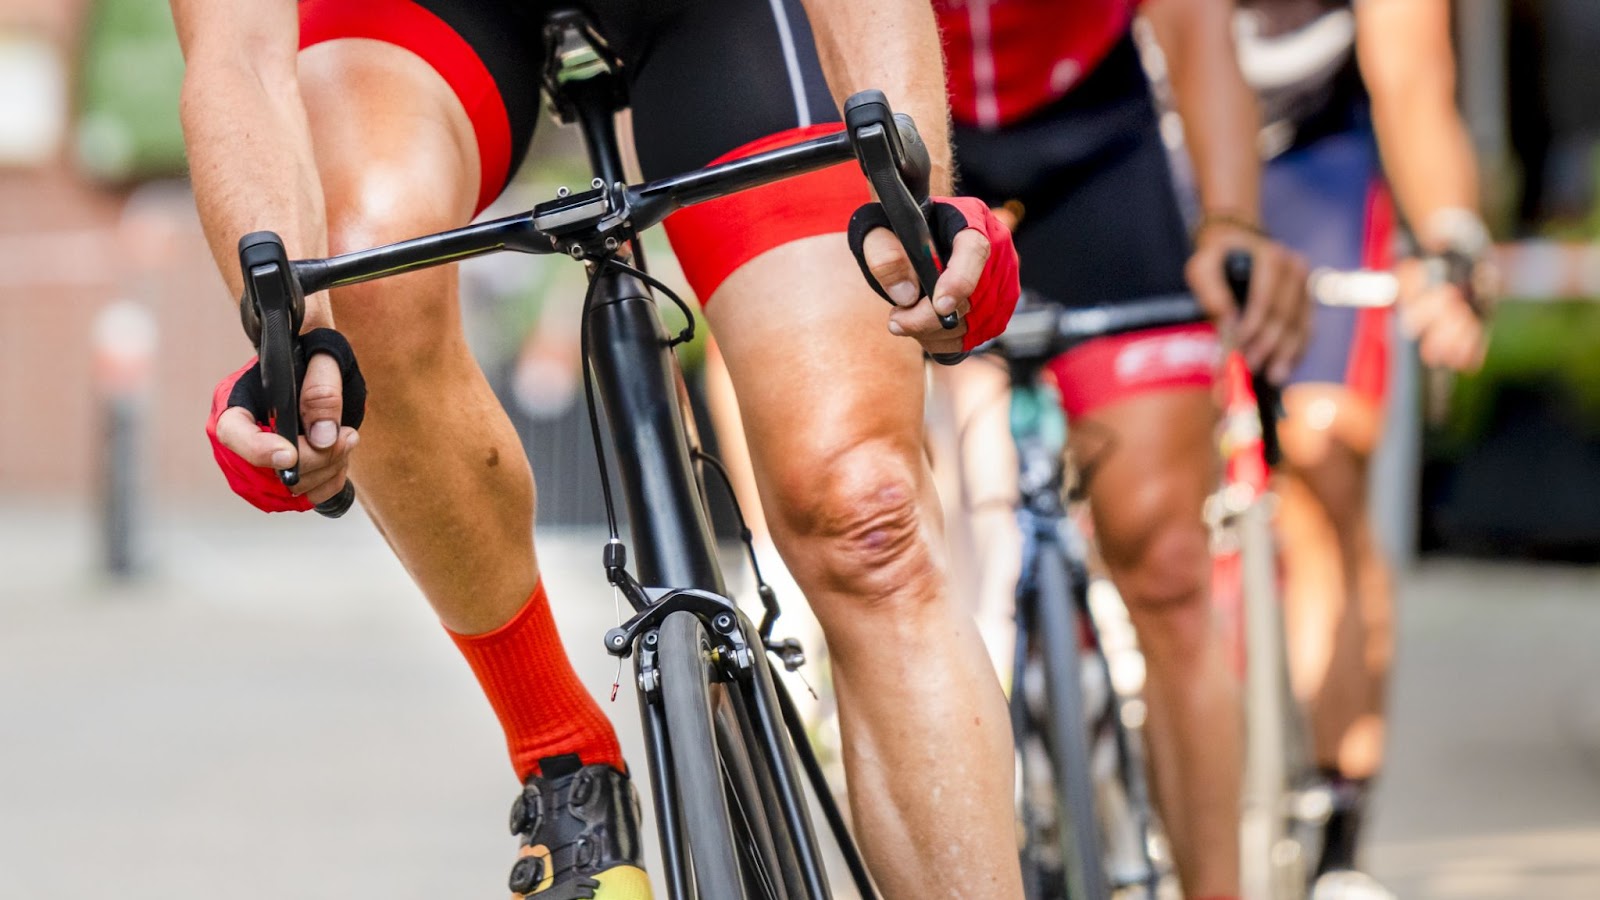 Optimal Nutrition for Preparing Your Body Before a Bike Ride